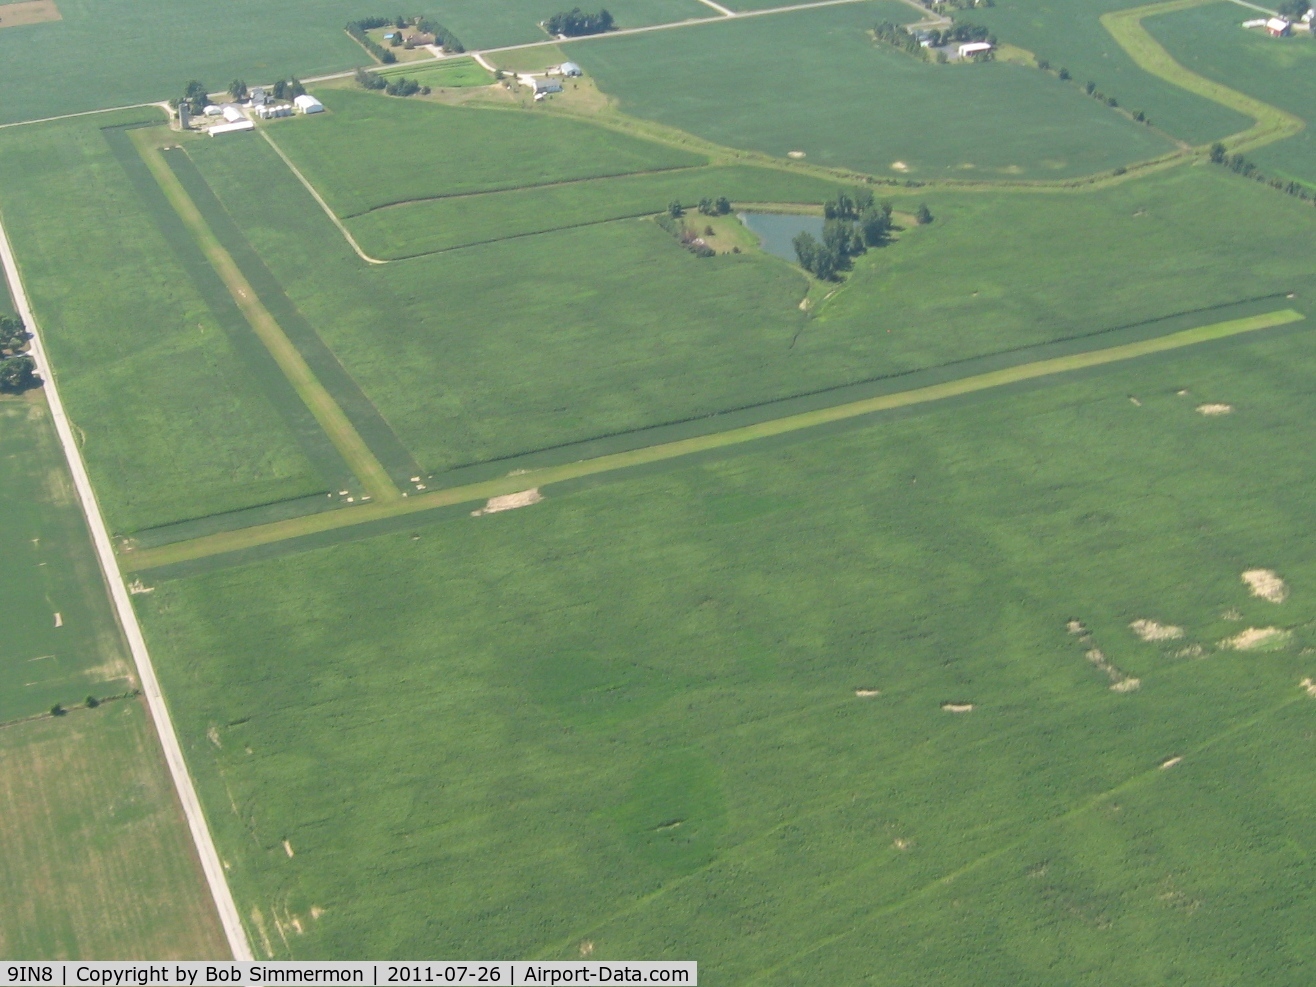 Green Field Airport (9IN8) - Looking south from 2500'